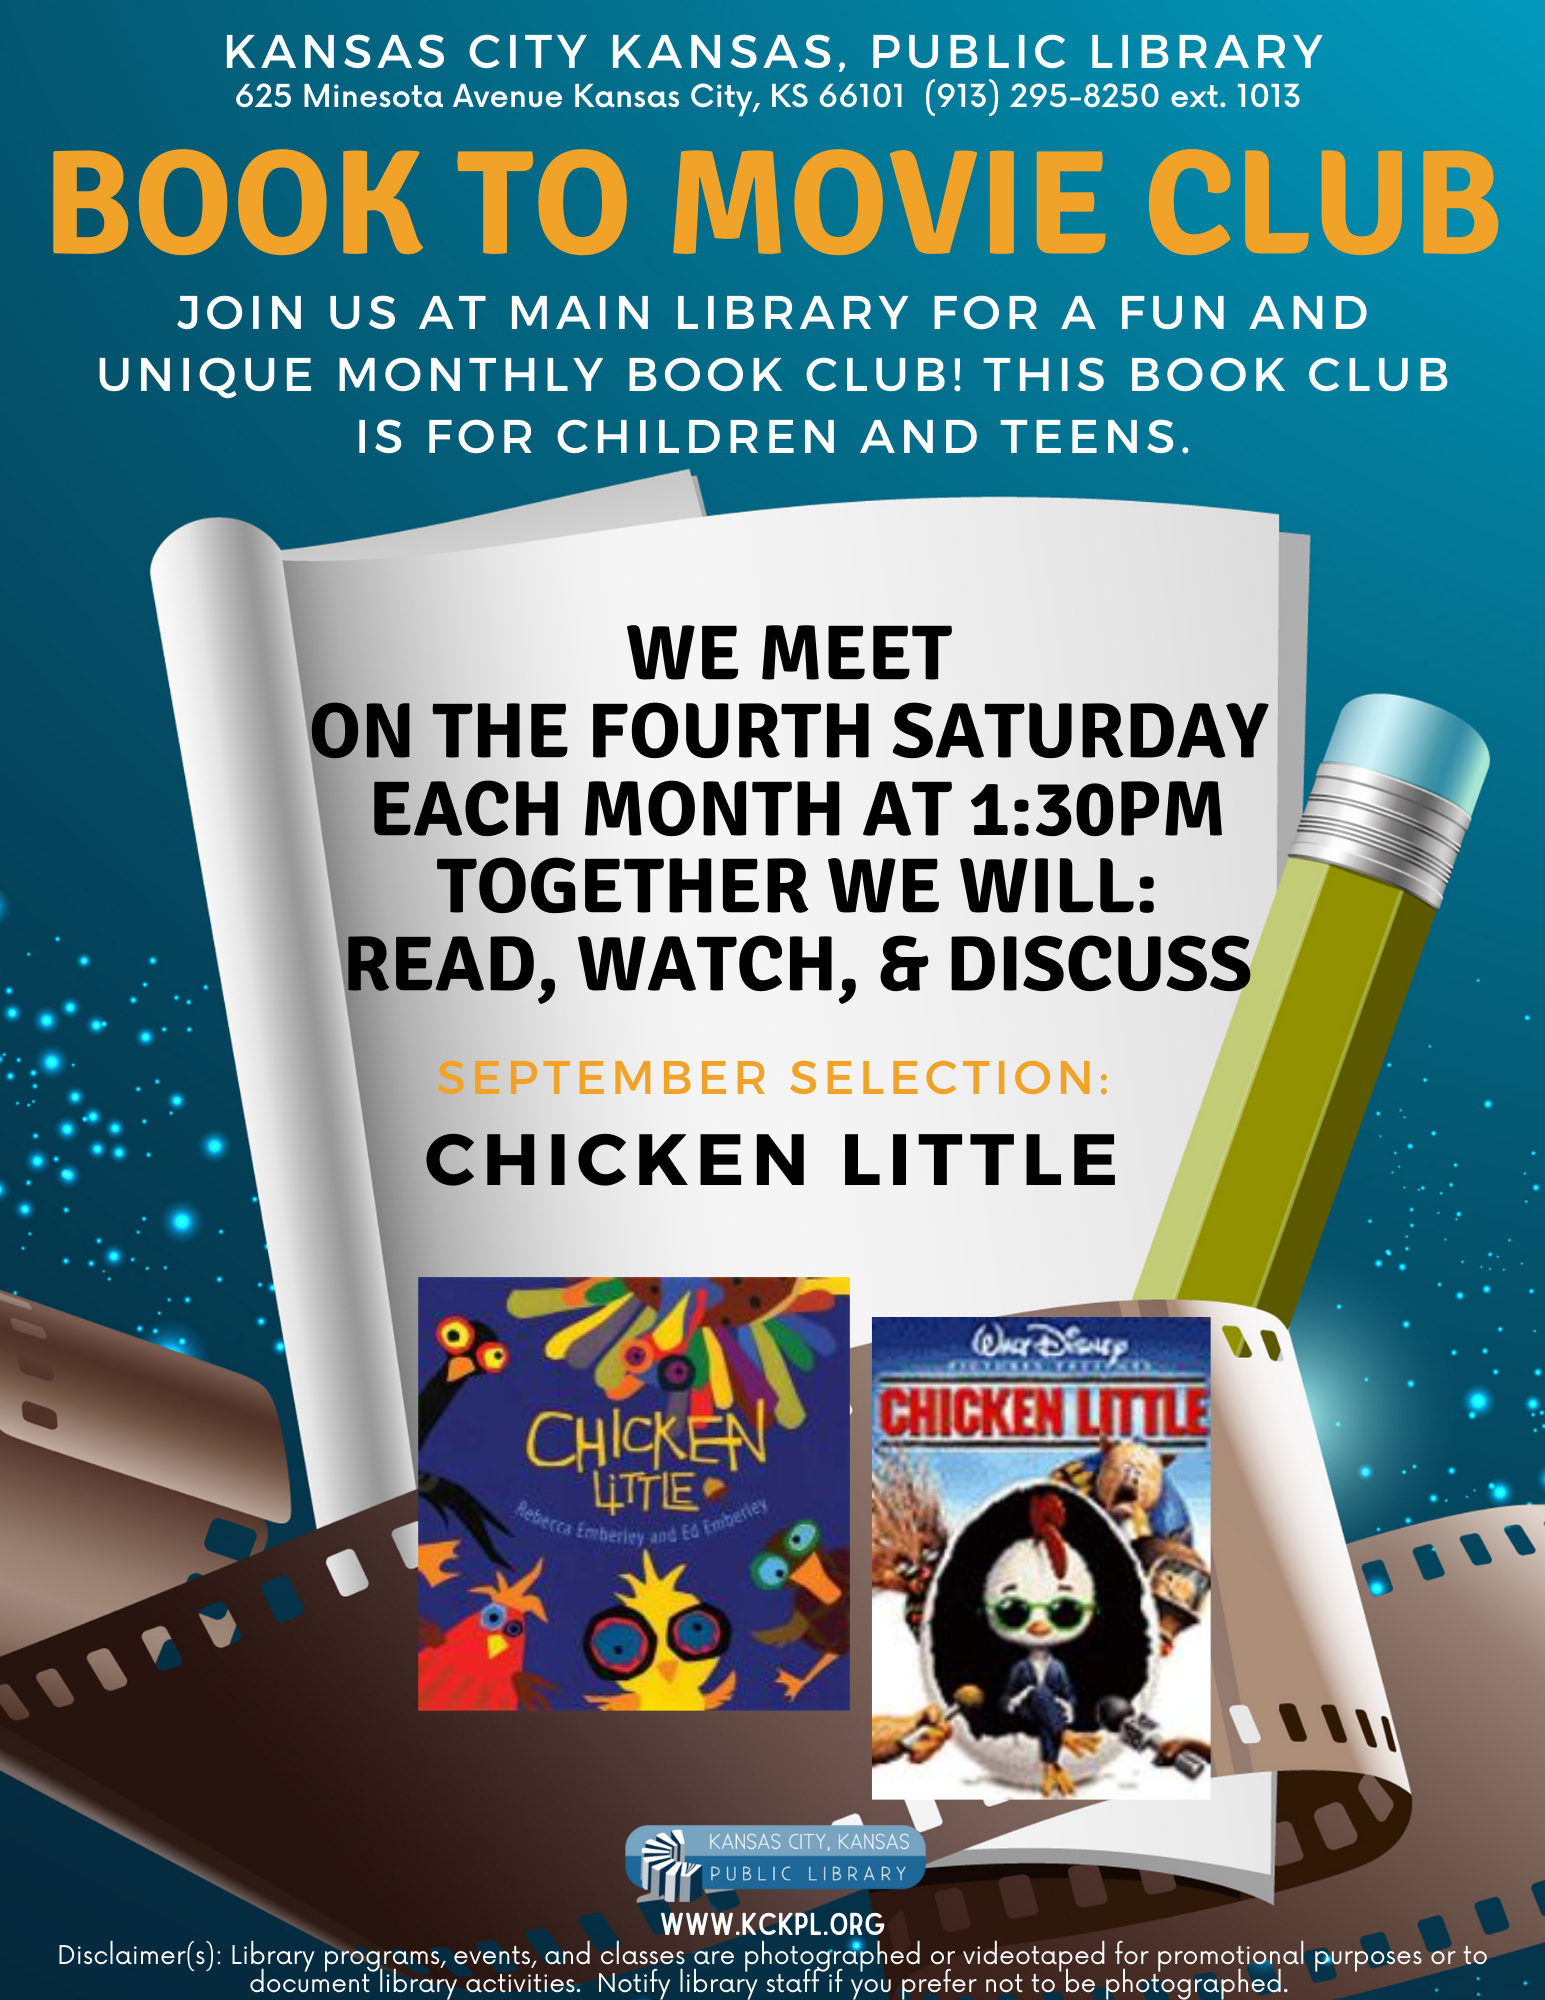 Book to movie club flyer for Main Library.